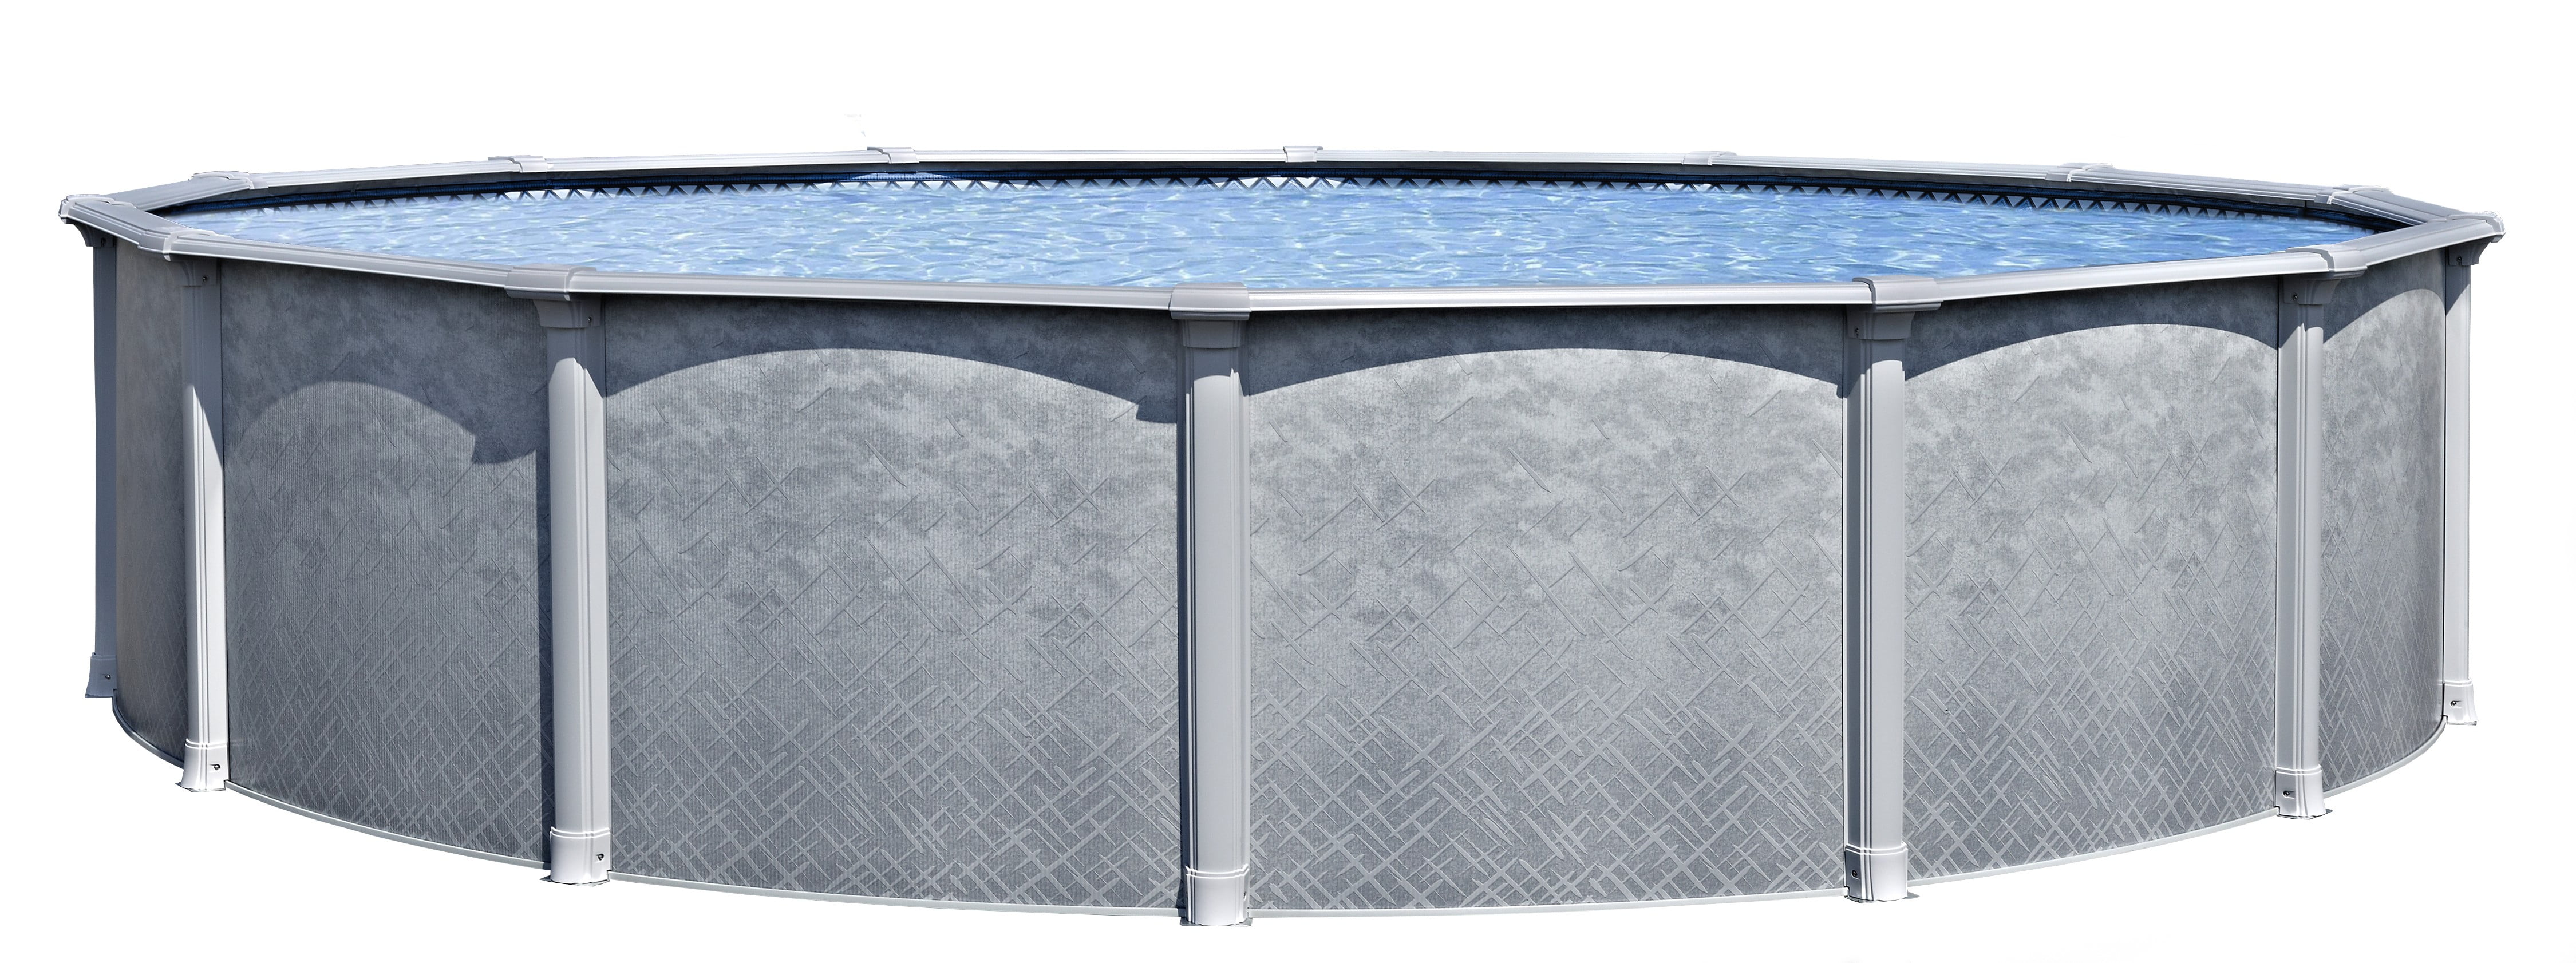 52-Inch Height Bundle with Solid Blue Overlap Liner & Widemouth Skimmer Lake Effect Metropolitan 15-Foot-by-30-Foot Oval Above-Ground Swimming Pool